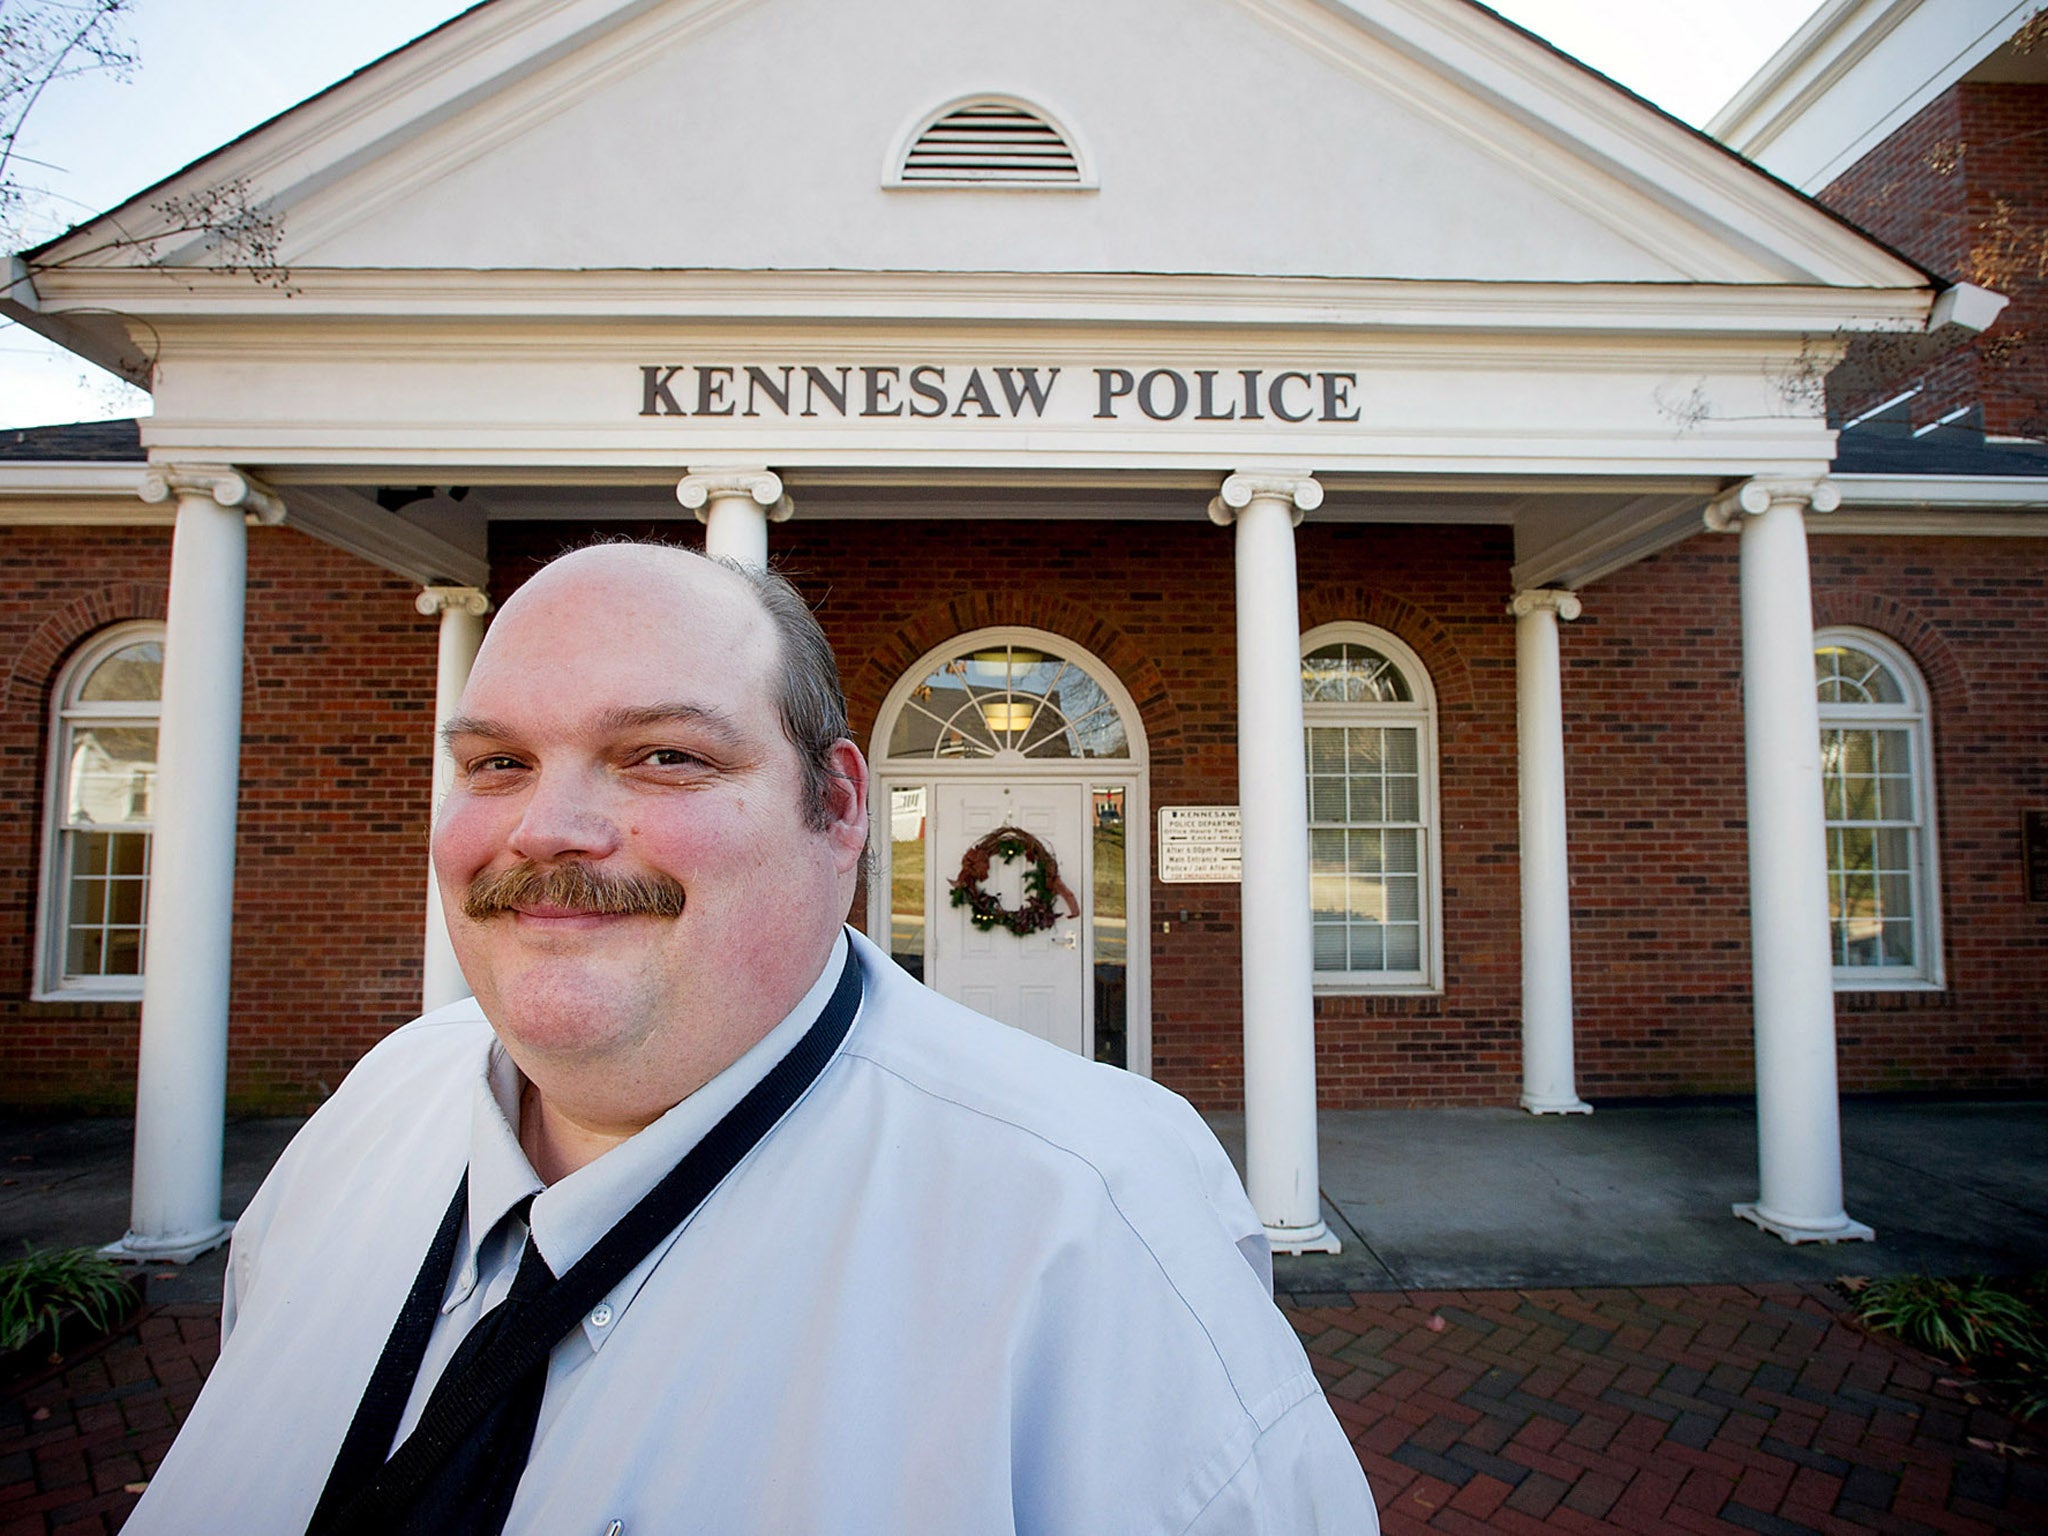 Kennesaw police lieutenant Craig Graydon, who explains the town’s gun ordinance to the international media after every mass shooting in the United States. “There’s sort of a Wild West image of us,” he said. “It’s just not true.”